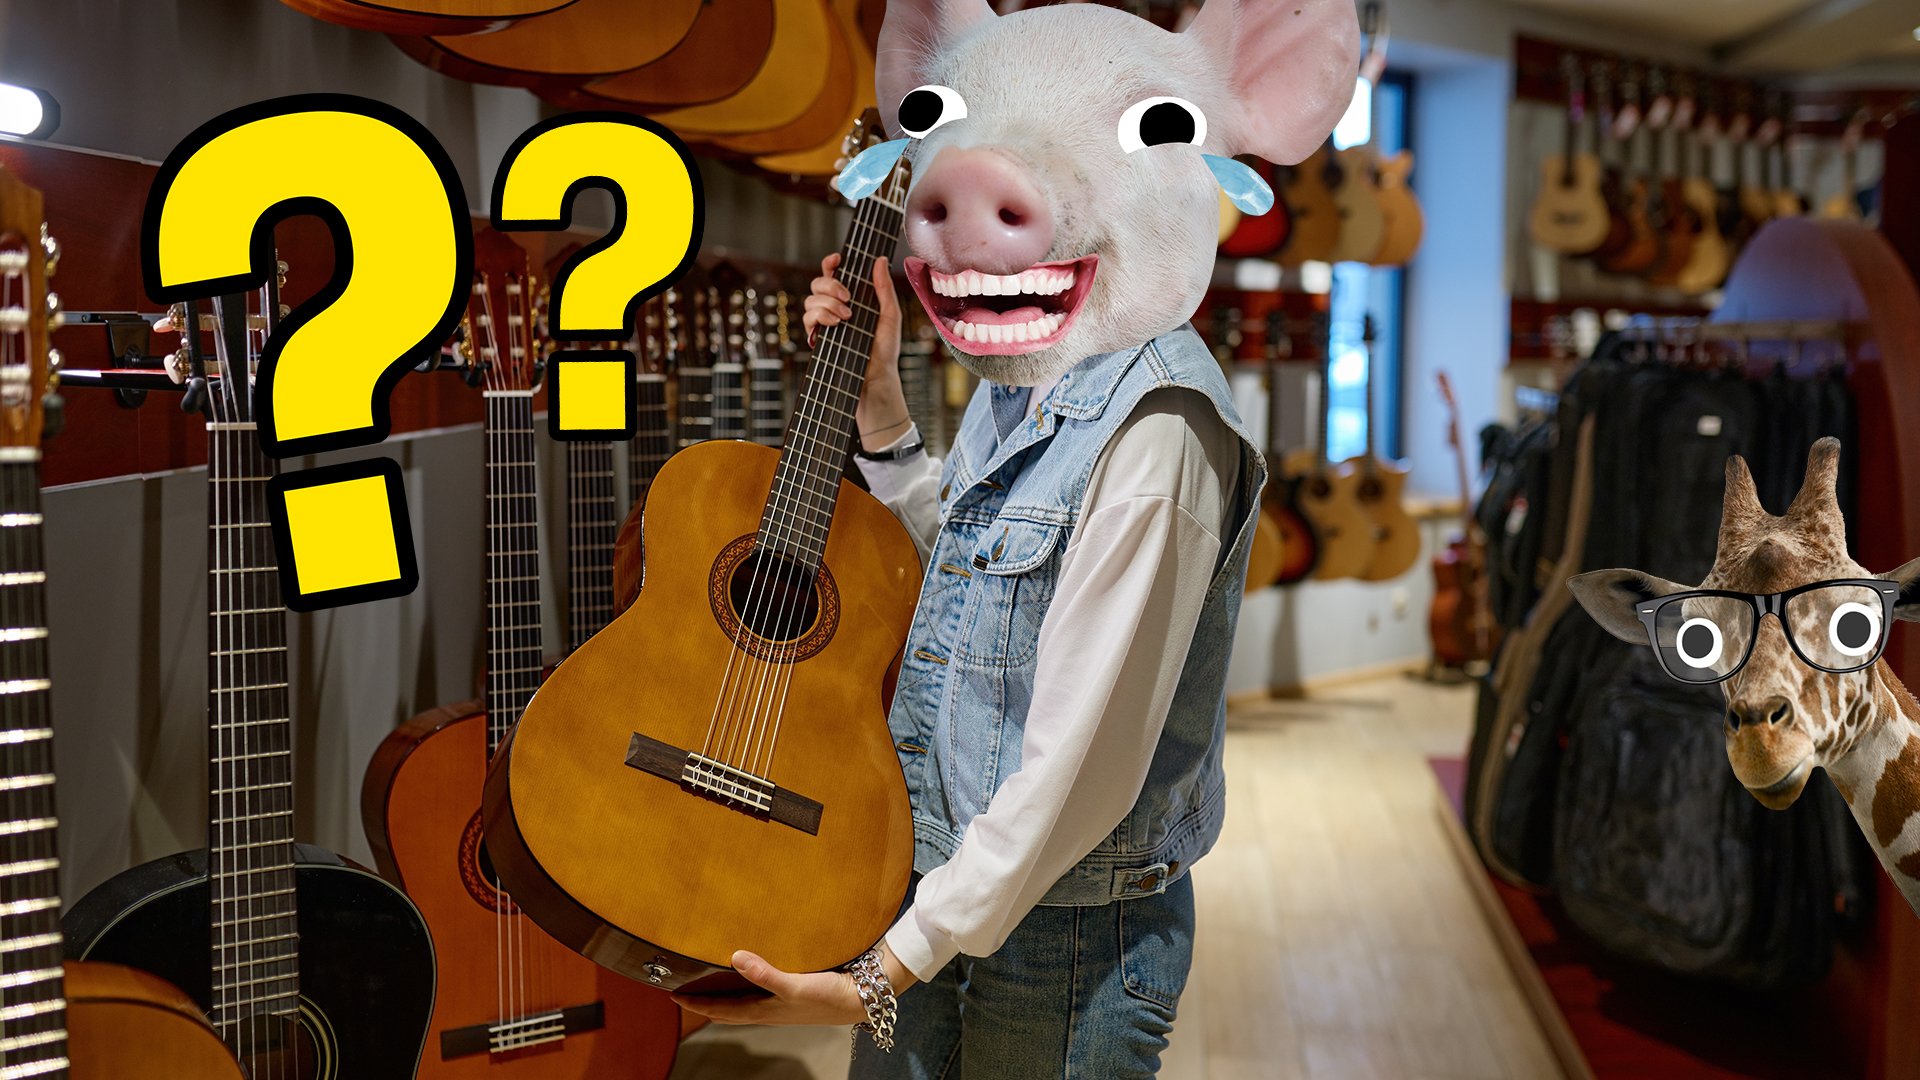 A pig holding an acoustic guitar in a music shop